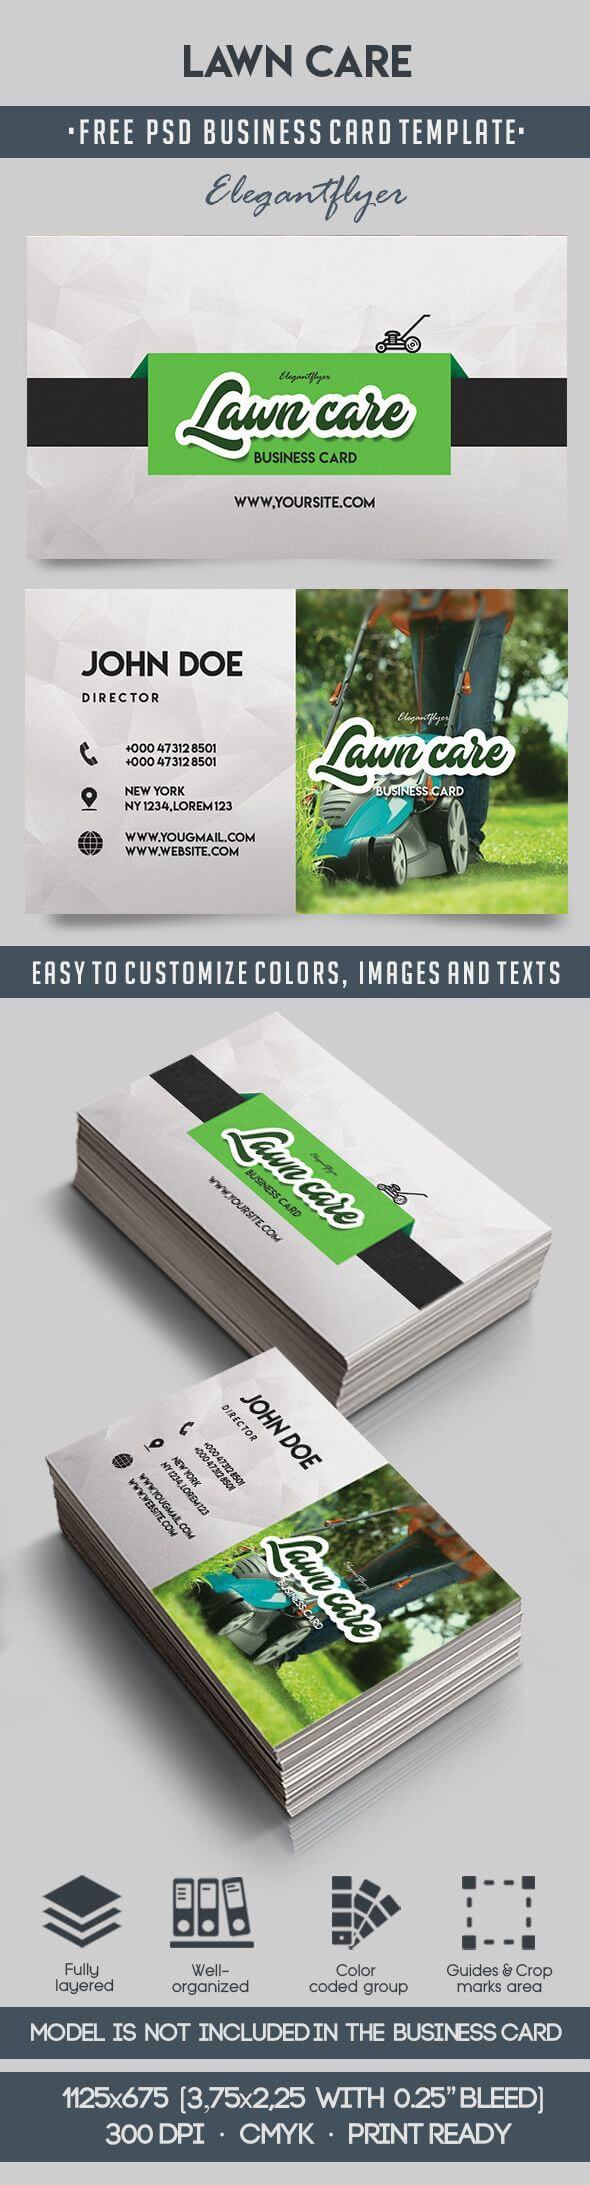 Lawn Care – Free Business Card Templates Psd On Behance Throughout Lawn Care Business Cards Templates Free